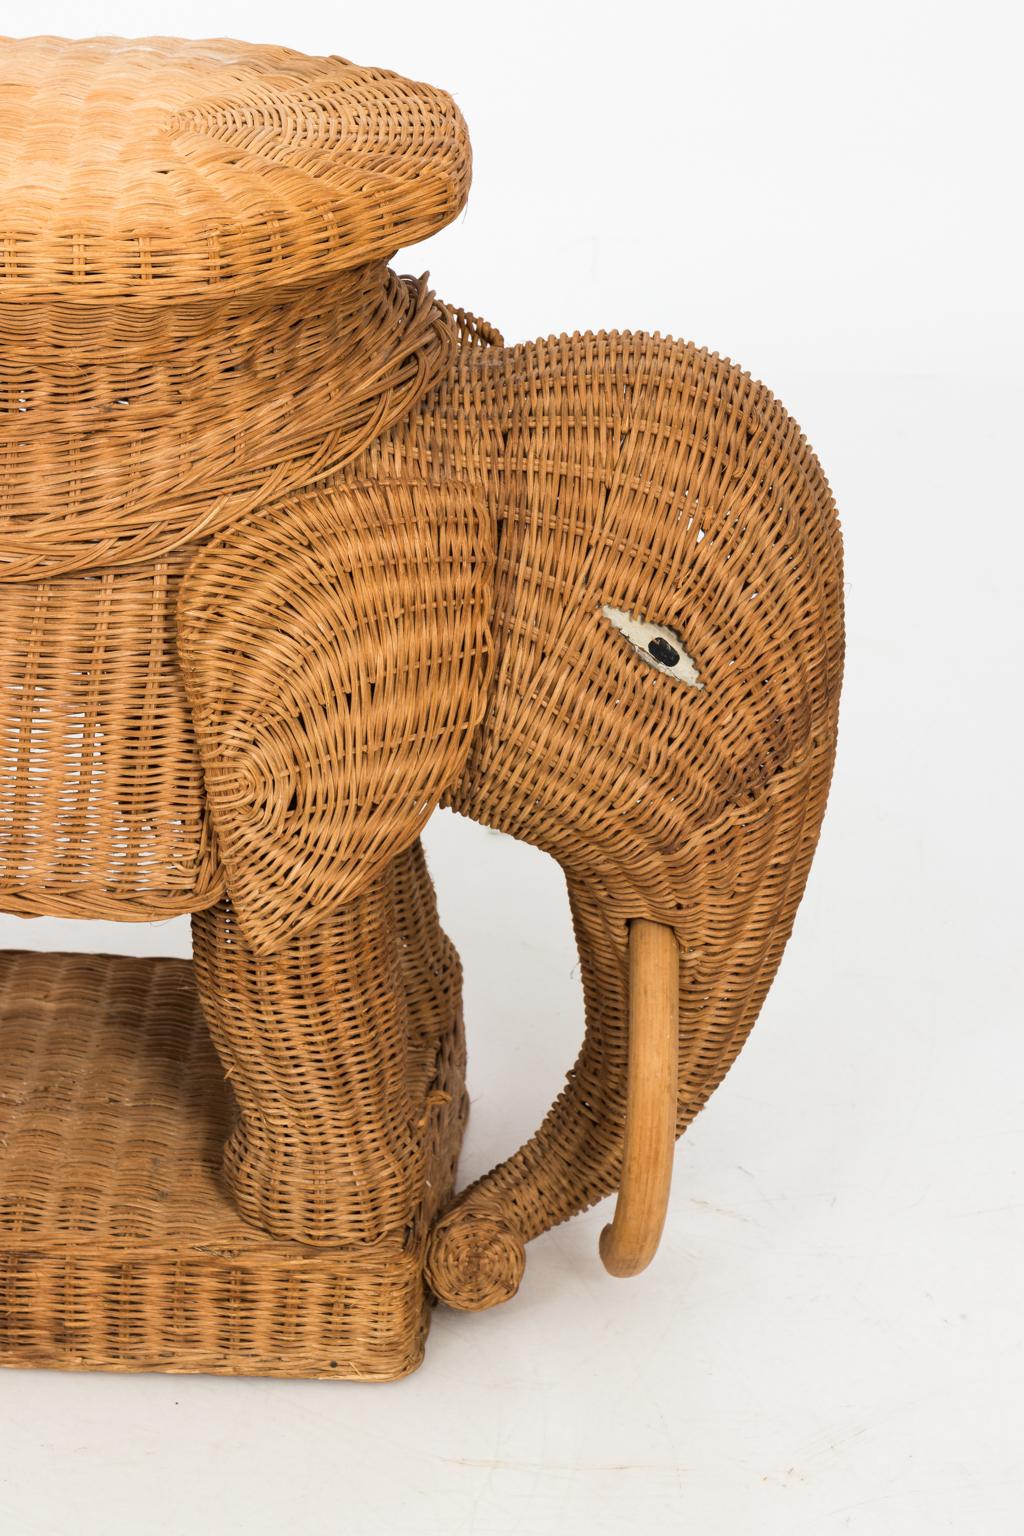 Circa 1960s woven wicker elephant occasional table with hand-painted eyes and wooden tusks. 